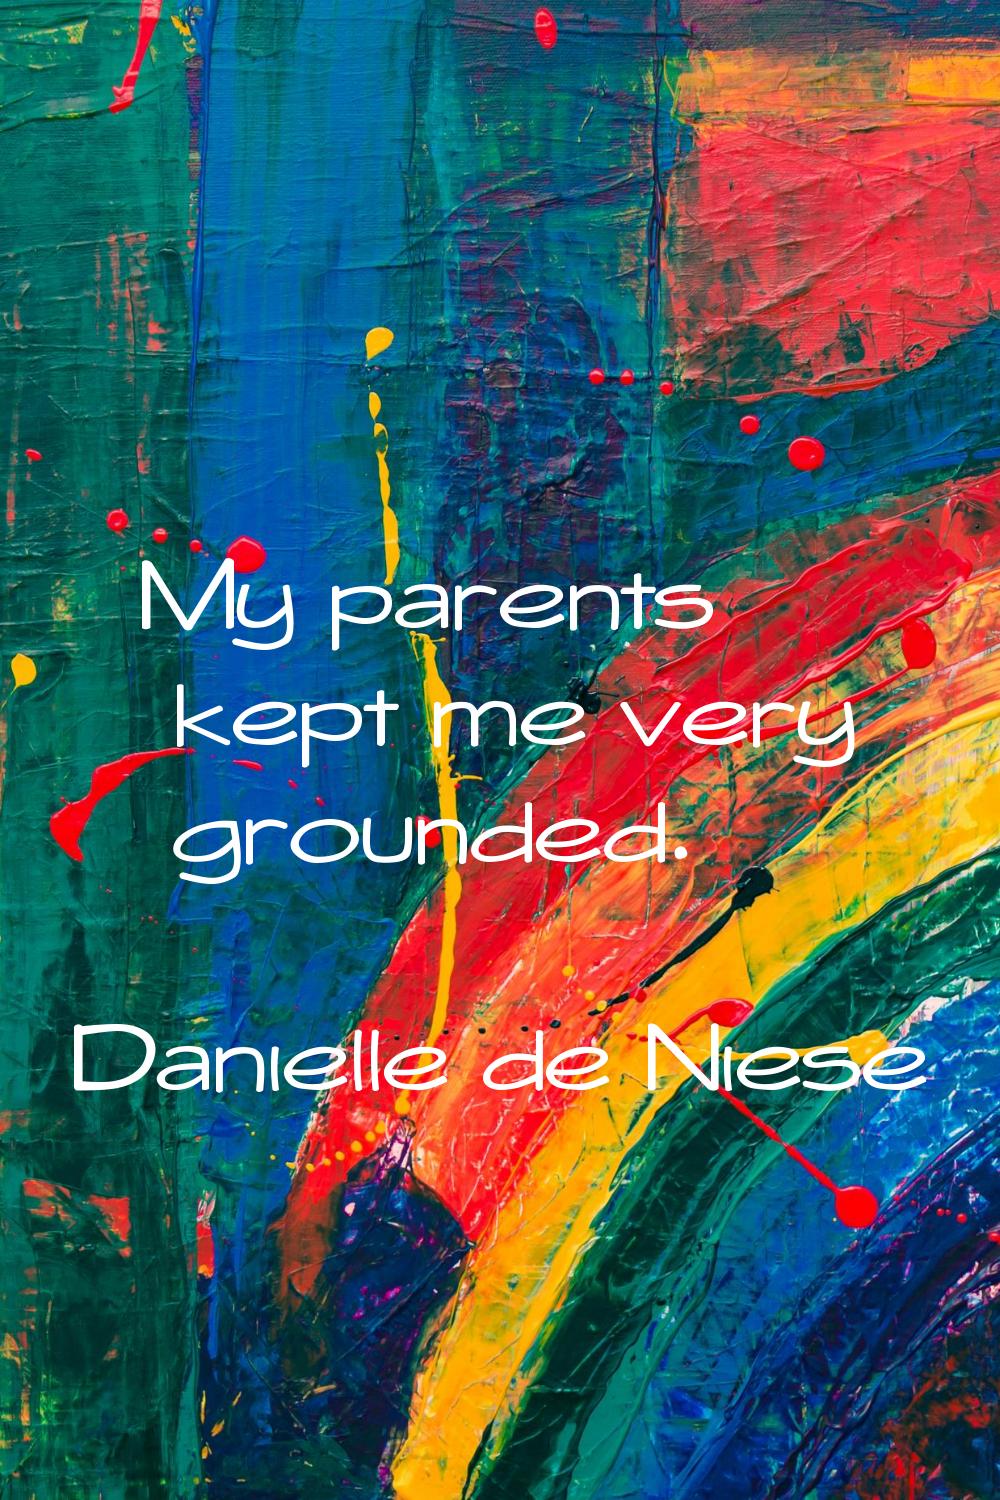 My parents kept me very grounded.